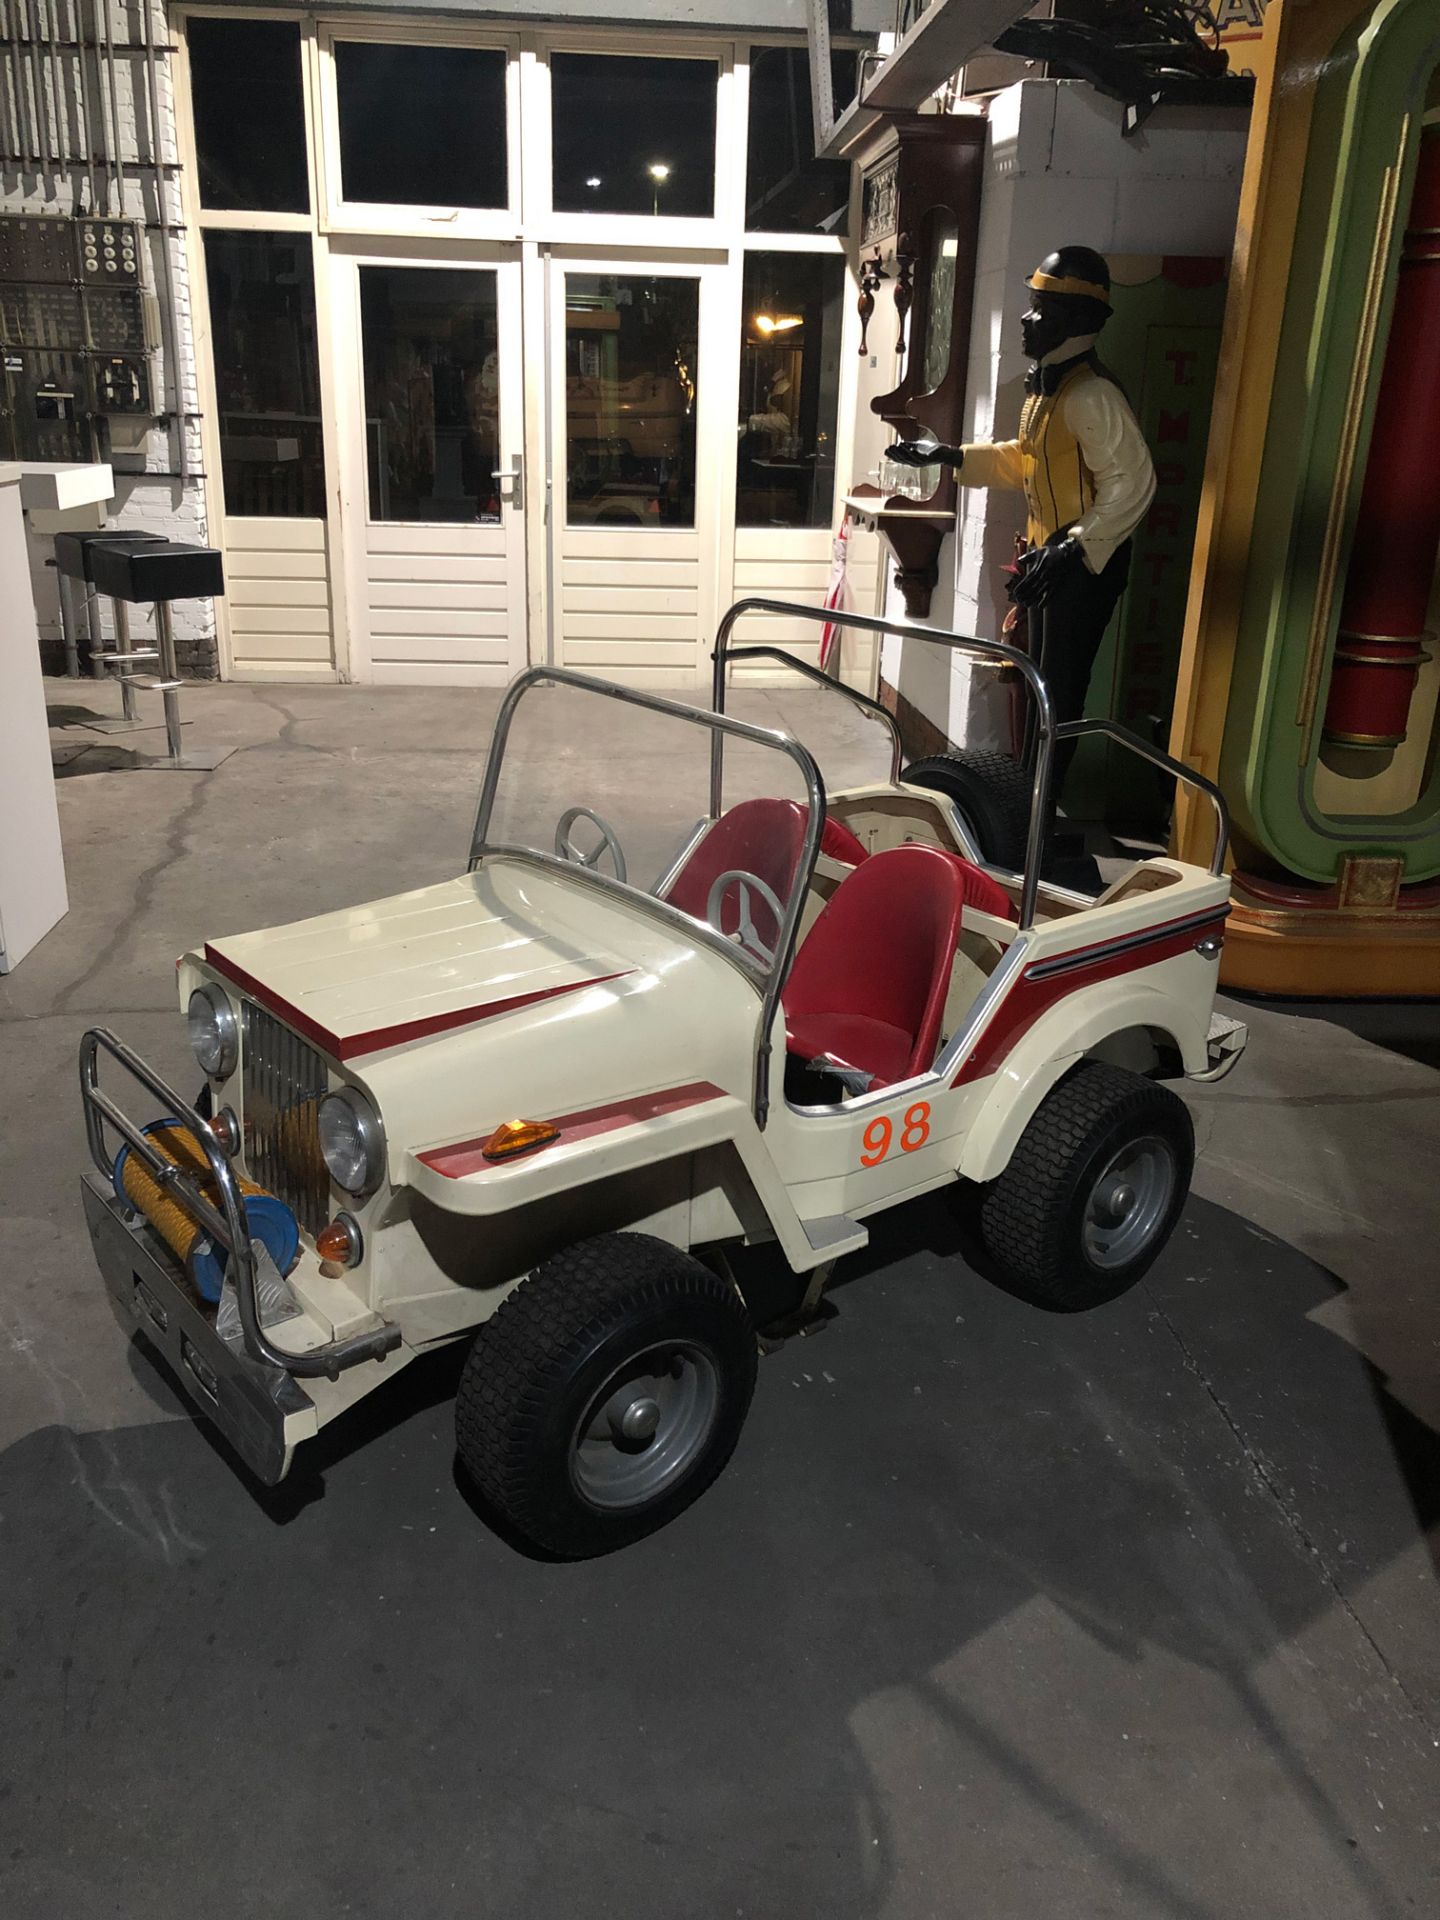 Rare 1988 Autopede Carousel Jeep Type 2 - Image 4 of 5